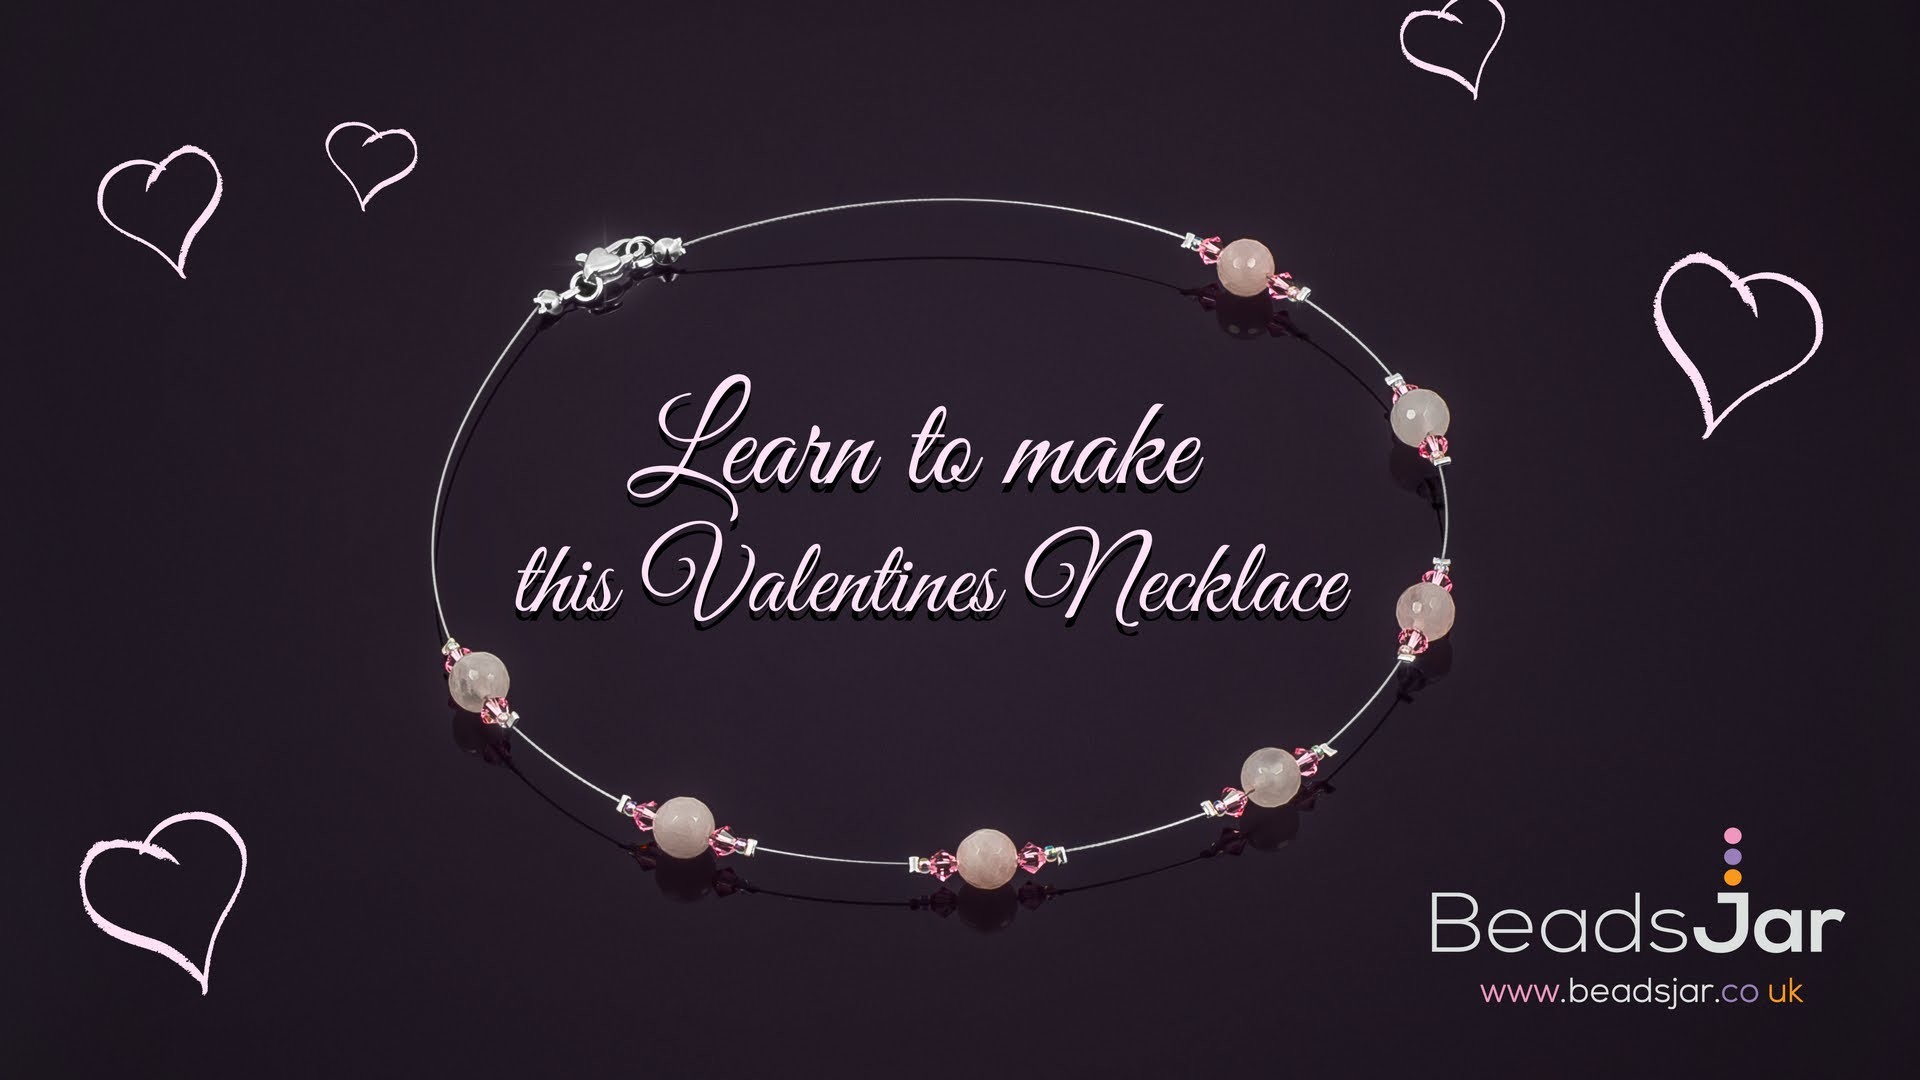 Learn how to make this Rose Quartz Valentines Necklace